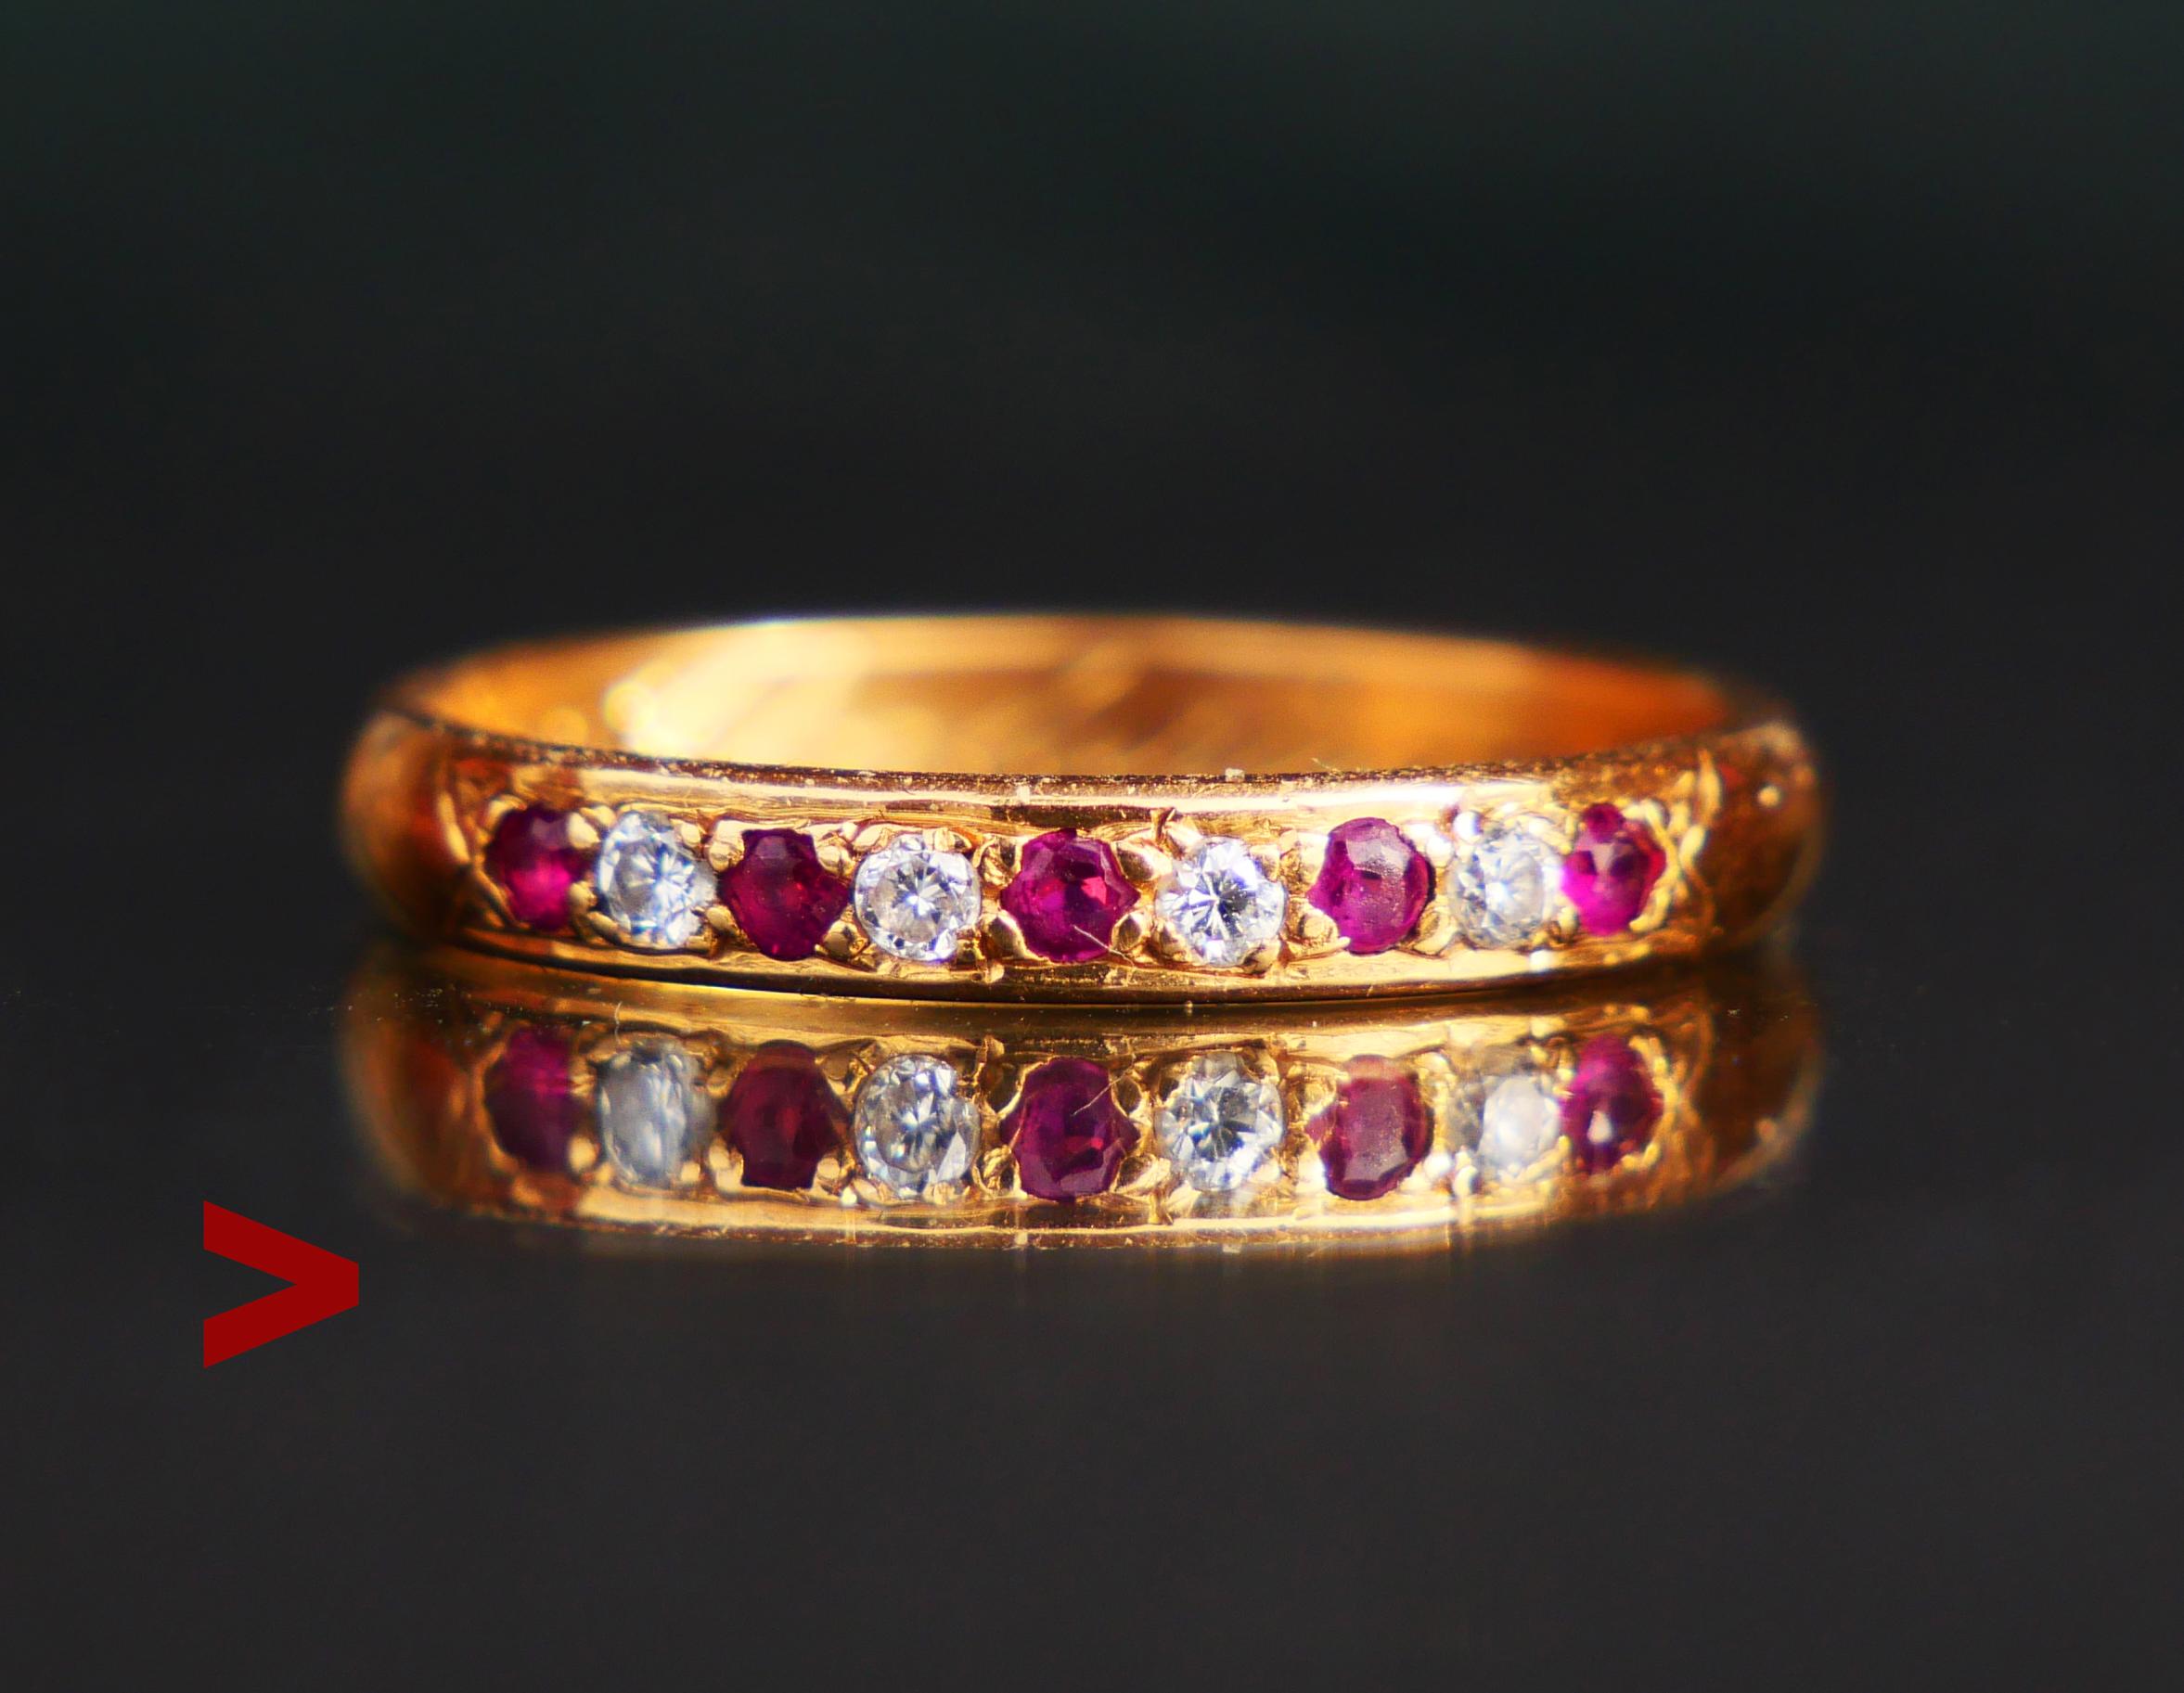 Alliance Ring in solid 18K Yellow Gold with 9 pave set brilliant cut Diamonds and Rubies Ø 1.75 mm / ca 0.02ct. each. Color of Diamonds ca. F,G / VVS. All stones have open backs. Custom hand- made, one of a kind ring.
Swedish hallmarks, 18K and